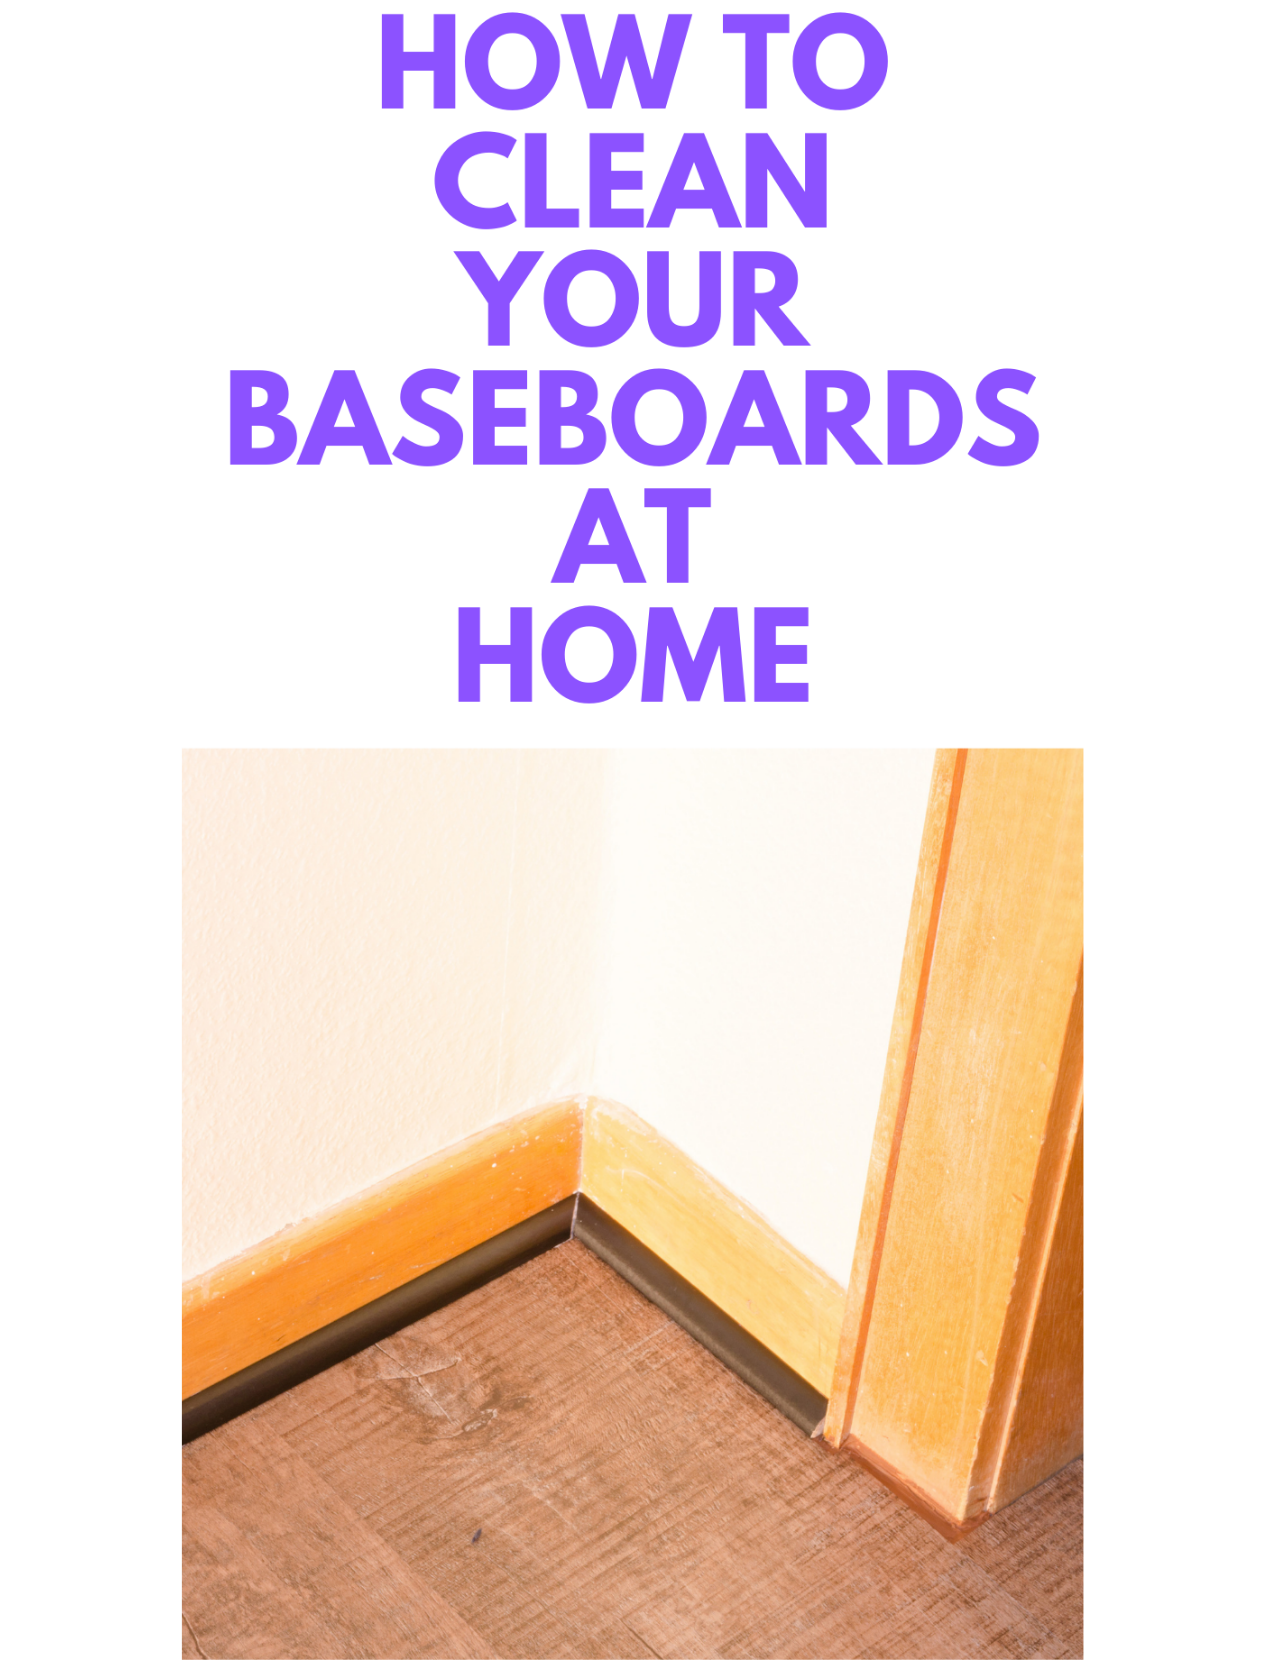 How to Clean Baseboards - Stylish Life for Moms